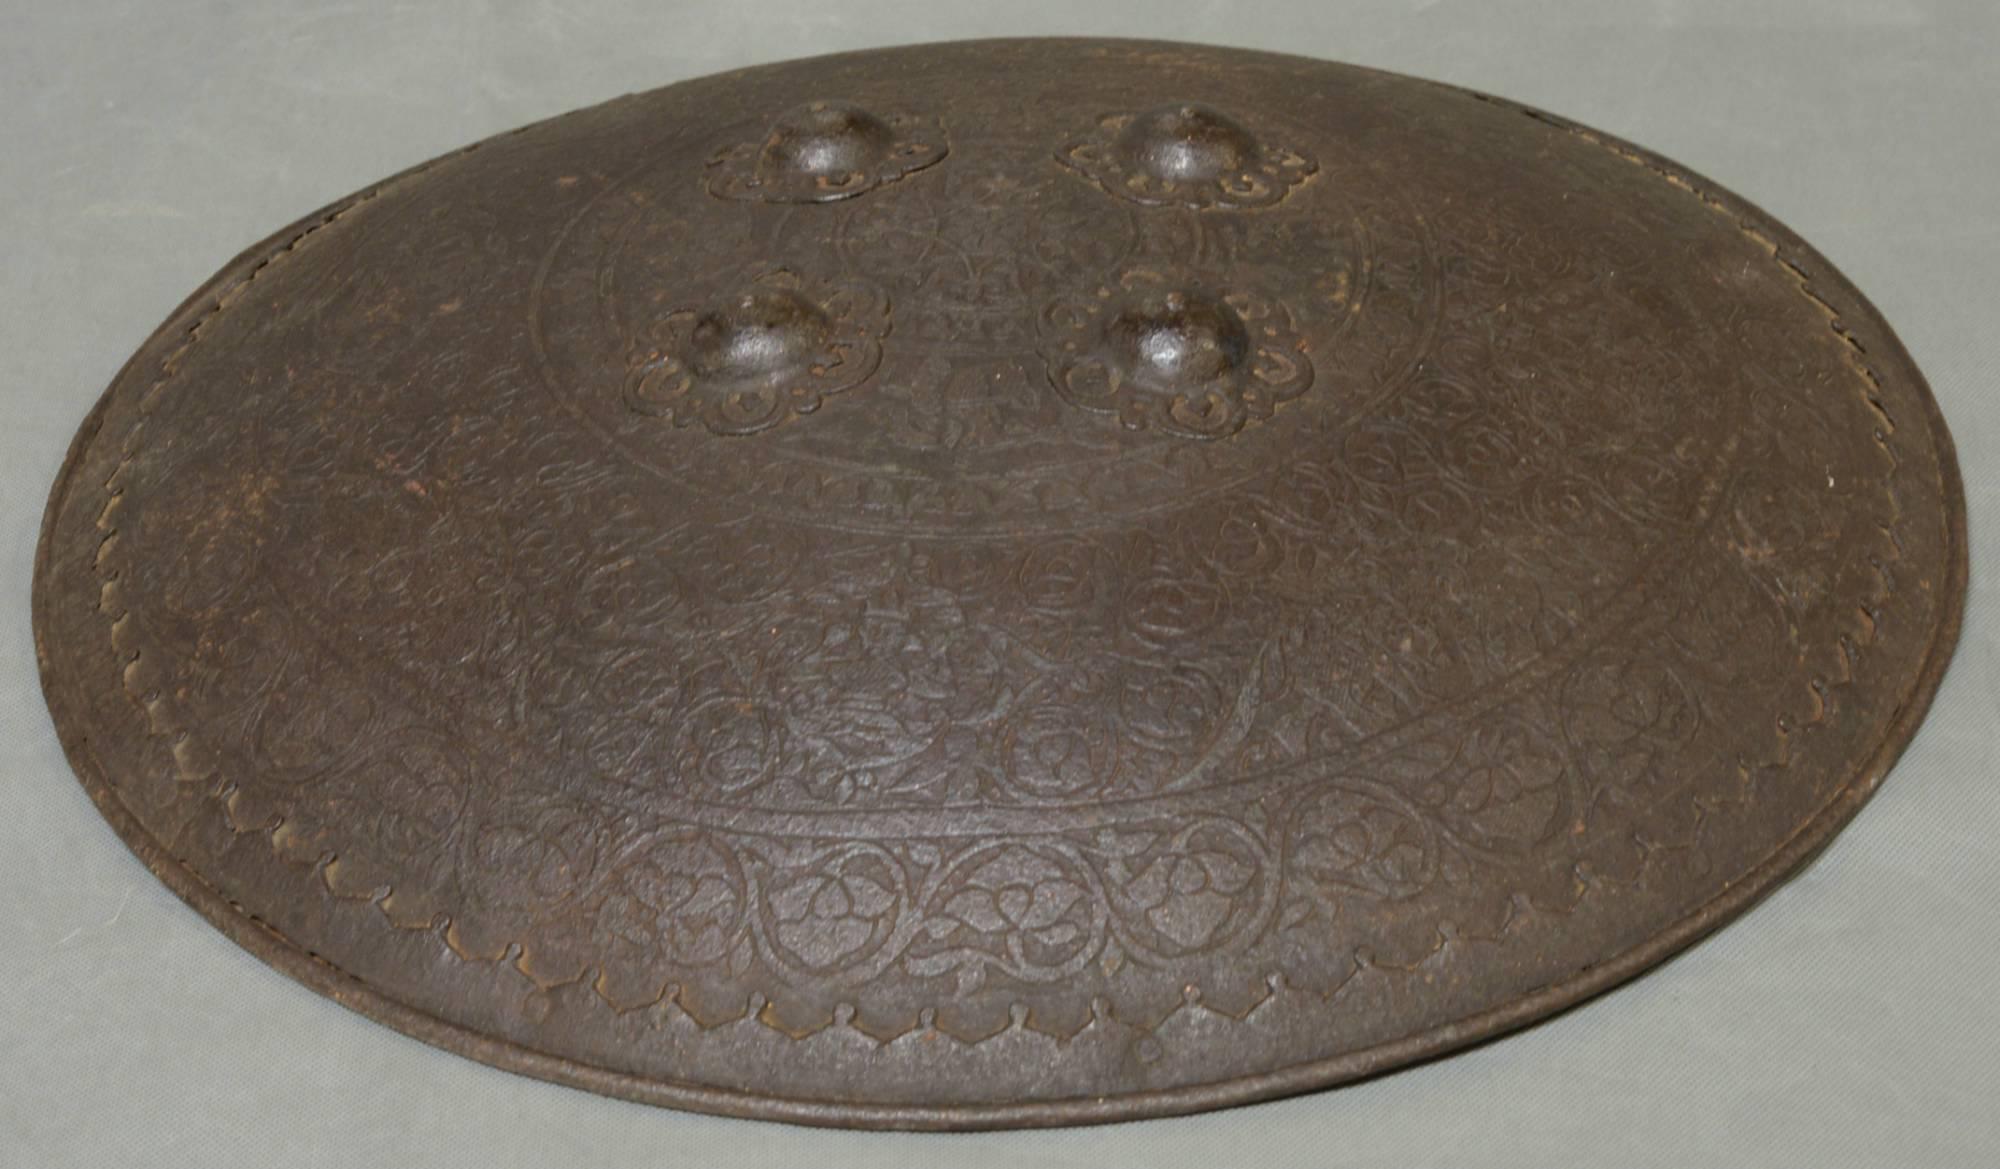 A late 18th century or early 19th century embossed Indo-Persian dahl shield.